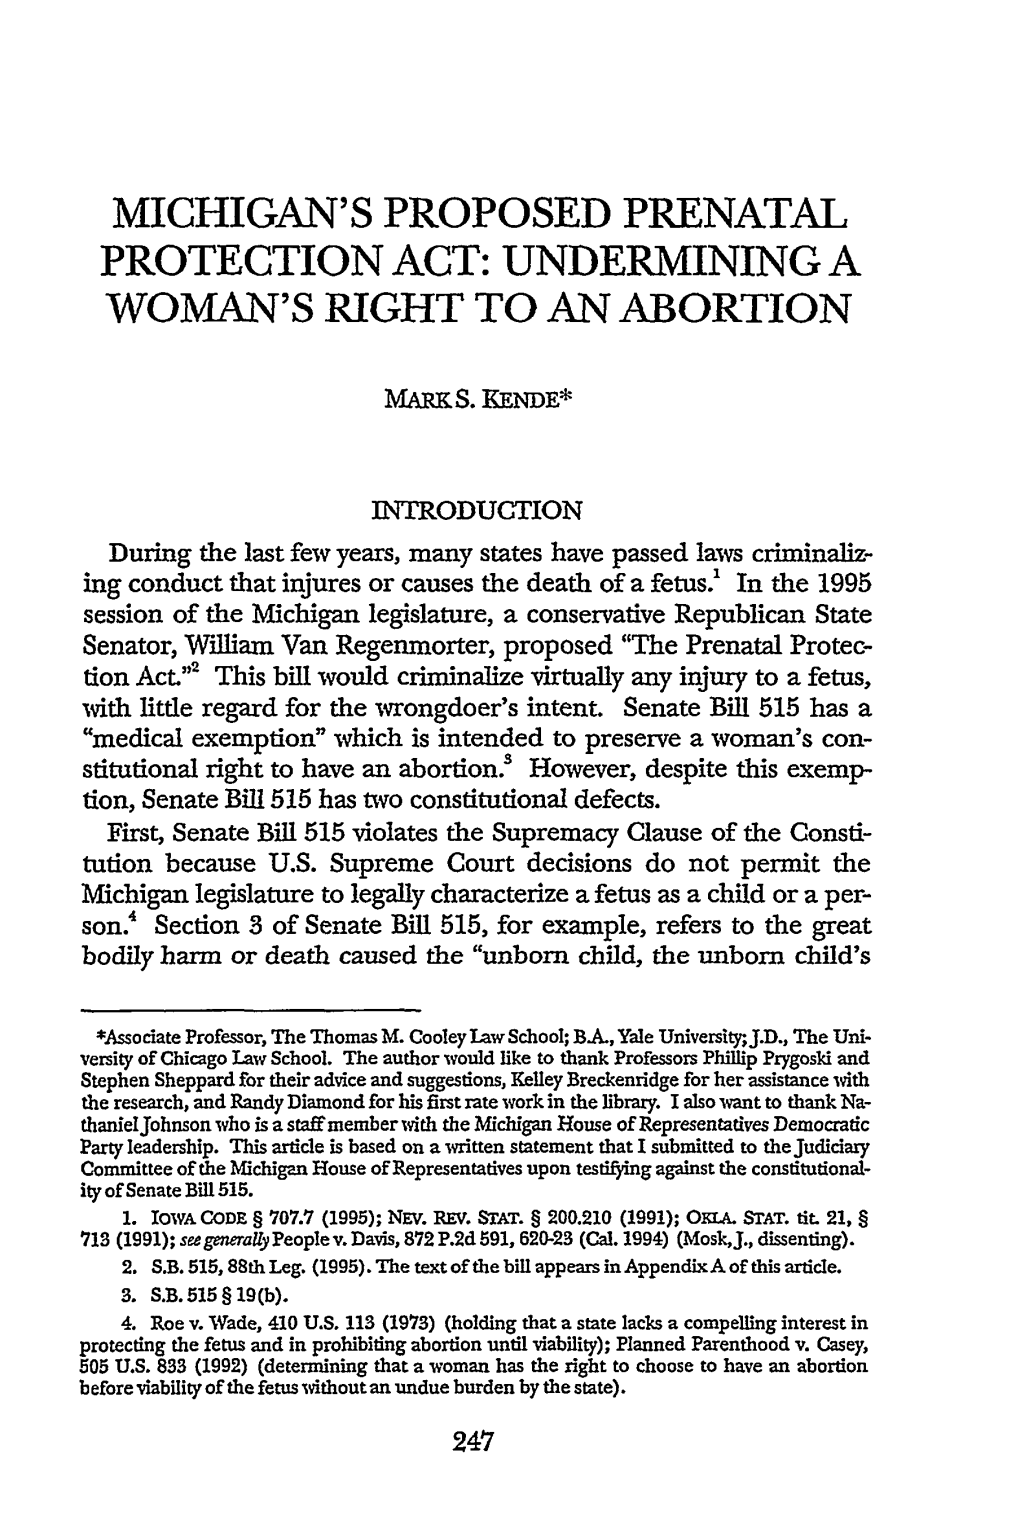 Michigan's Proposed Prenatal Protection Act: Undermining a Woman's Right to an Abortion